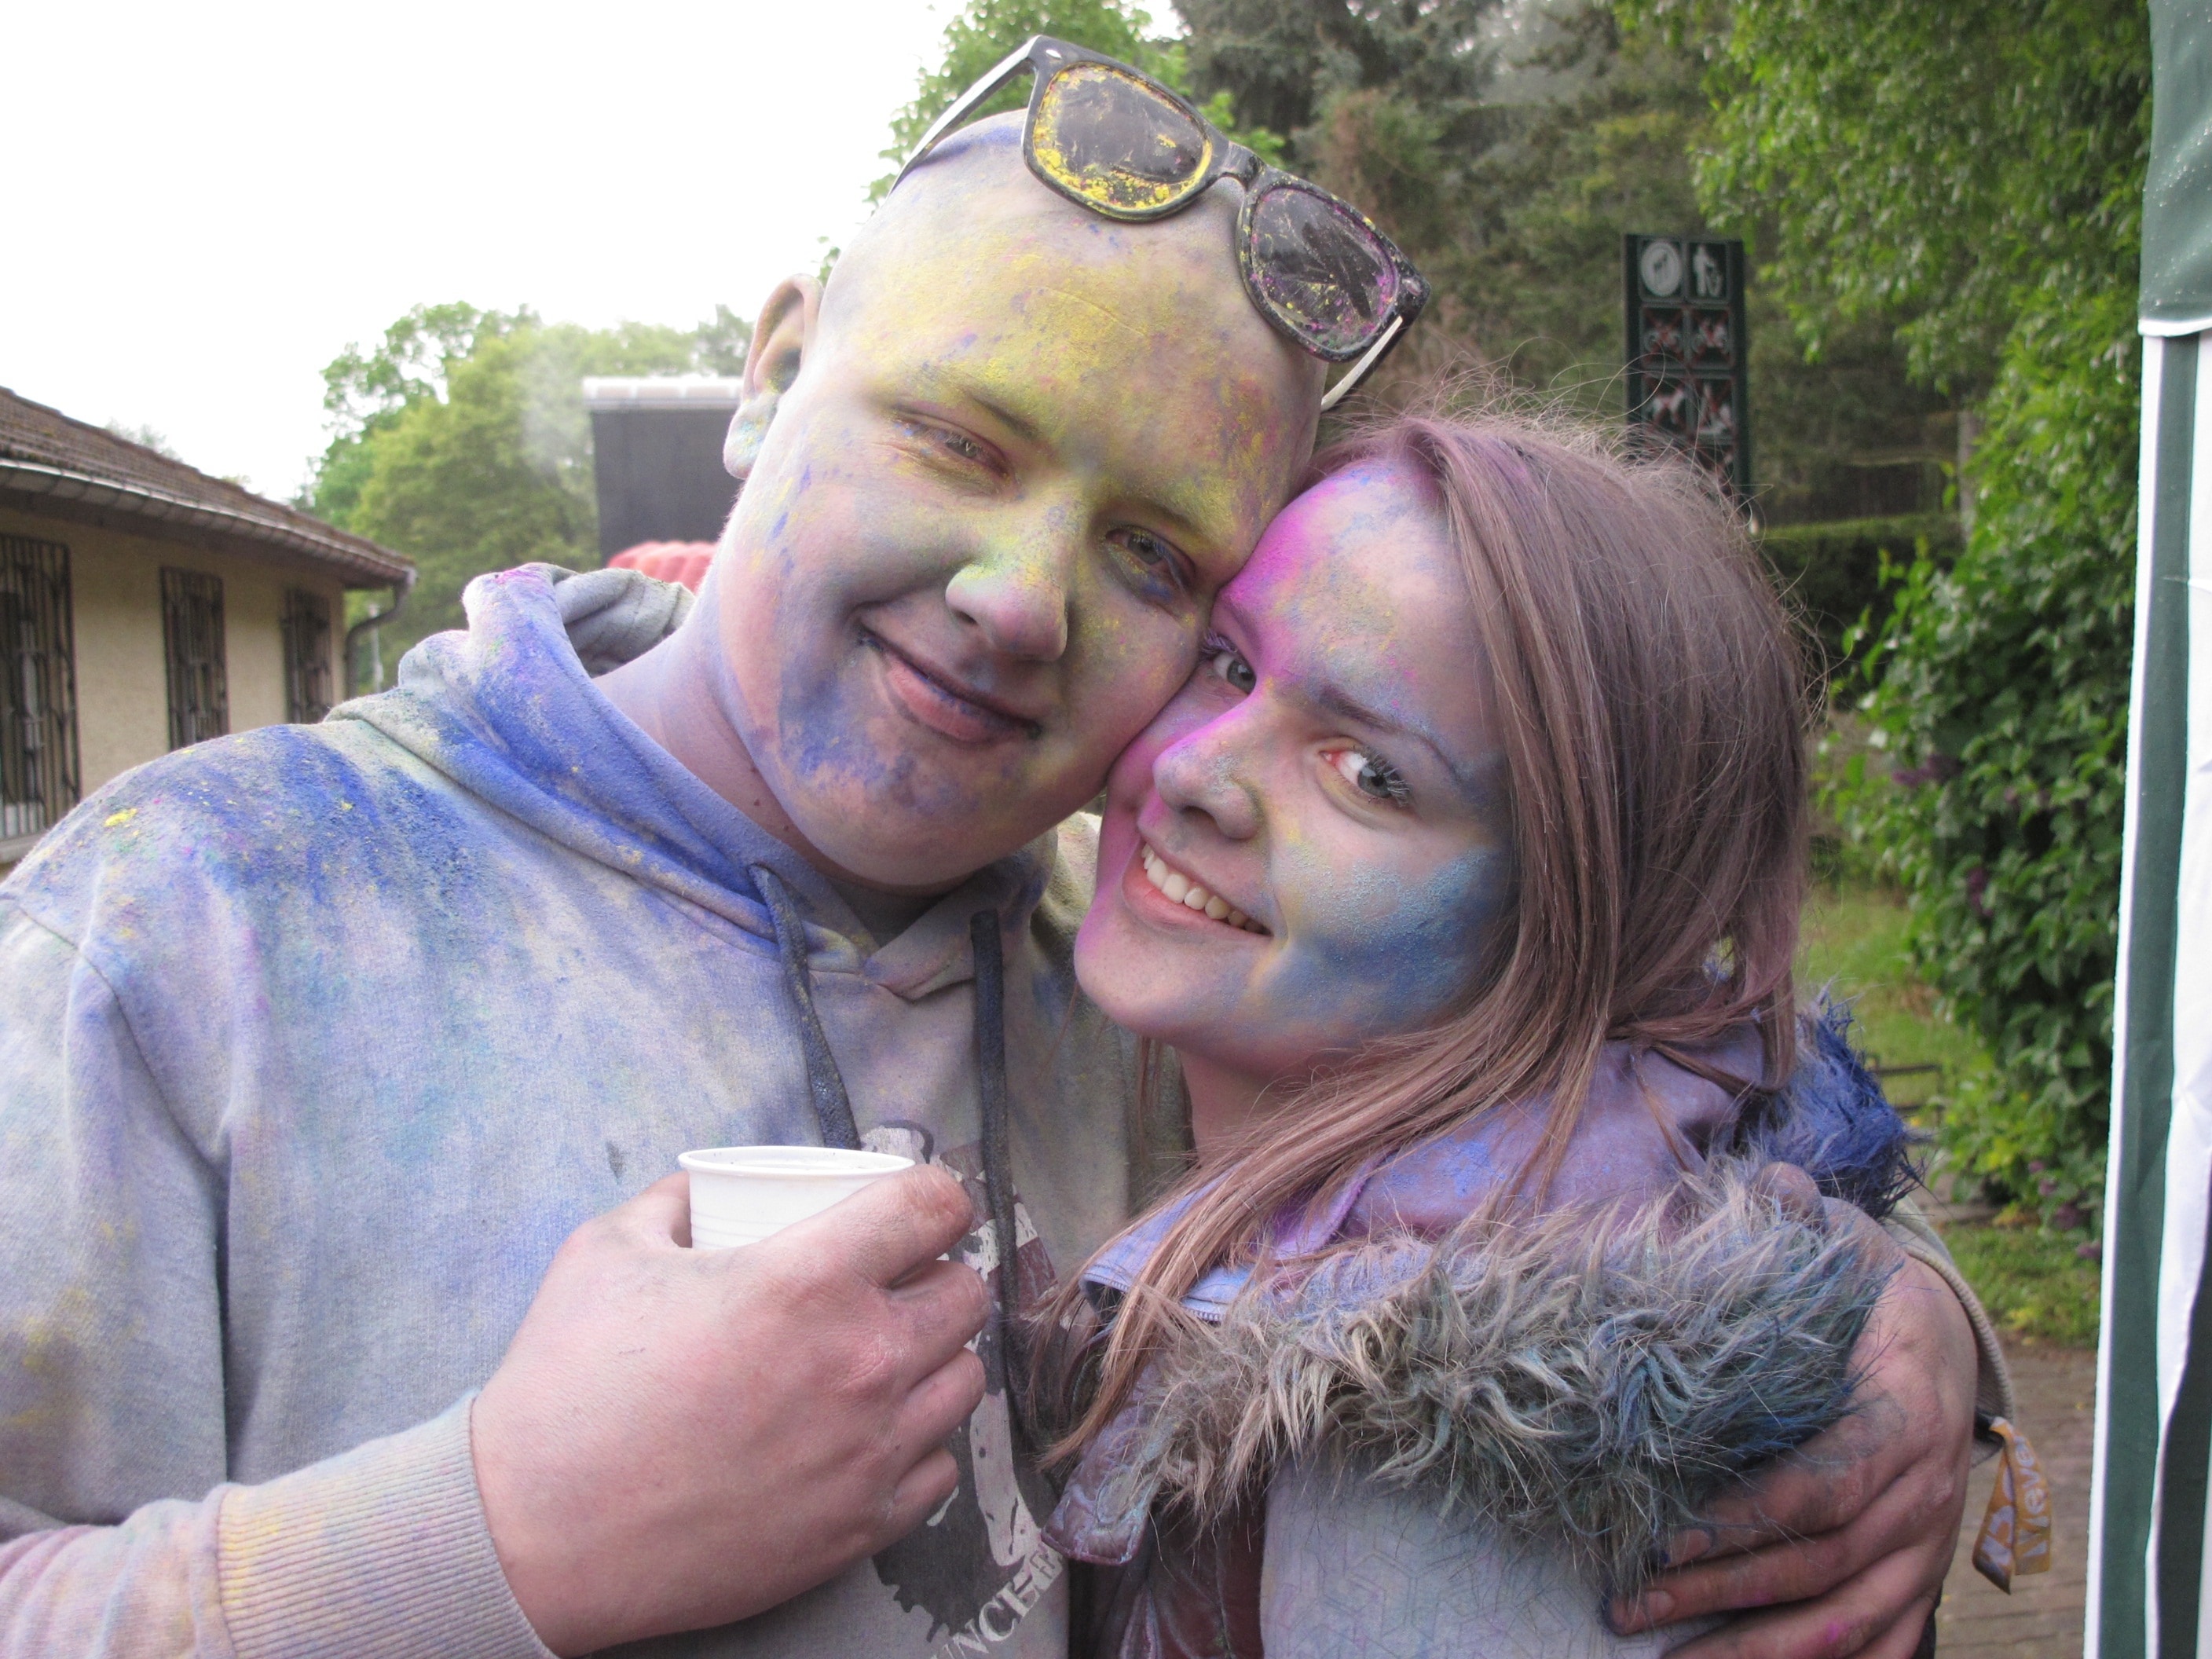 couple with color powder all over face and shirts embracing at daytime